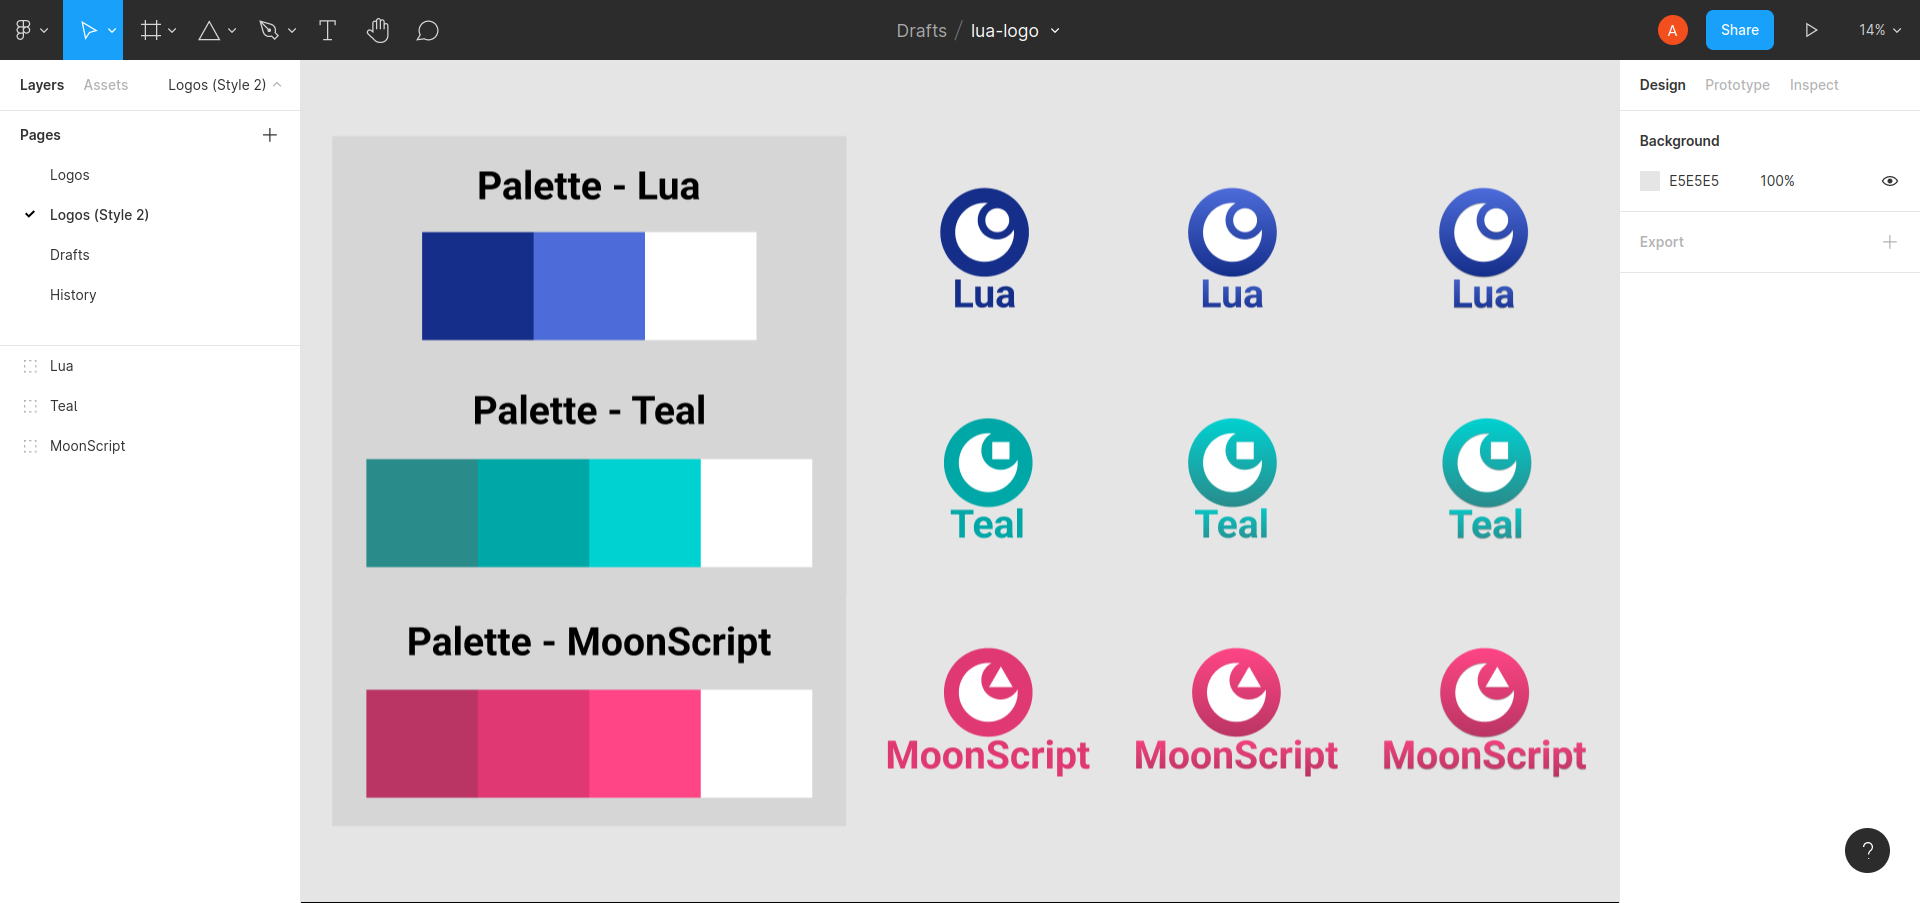 Other lua language flavor logos (Style 2)